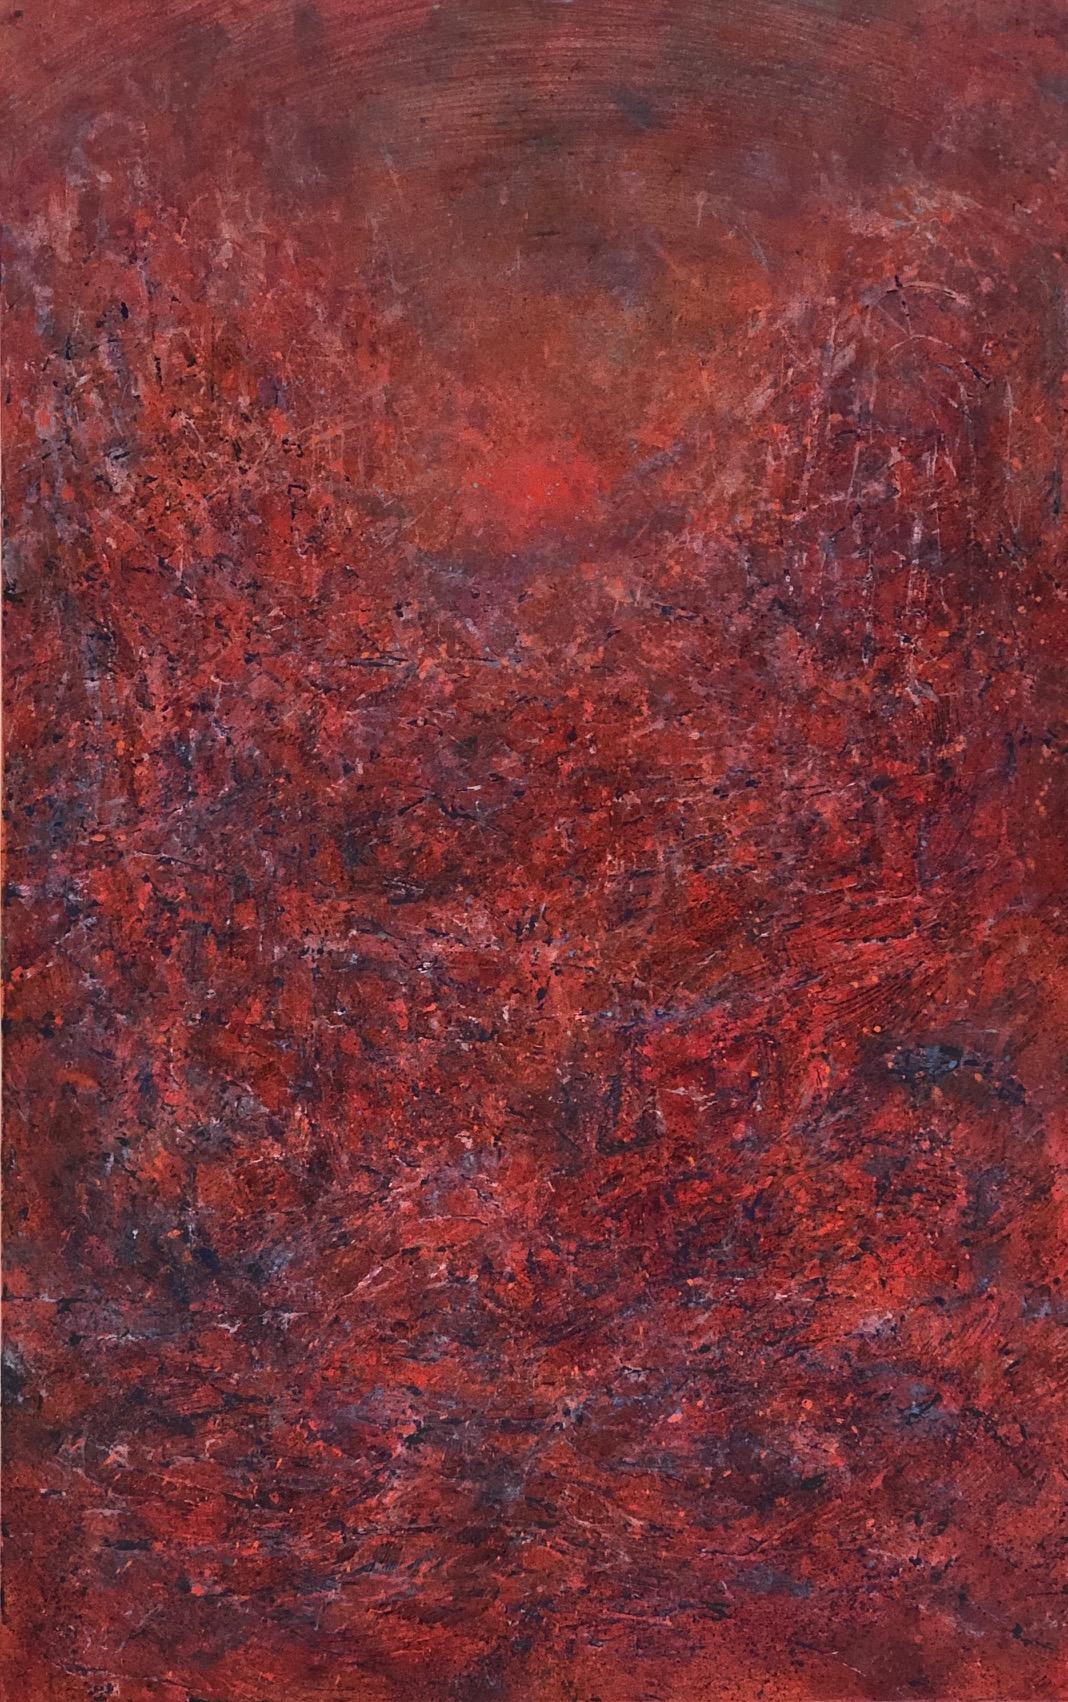 Augustus Cross Abstract Painting - "Untitled - Red, from the Storm Series" Red textured painting with distant sun